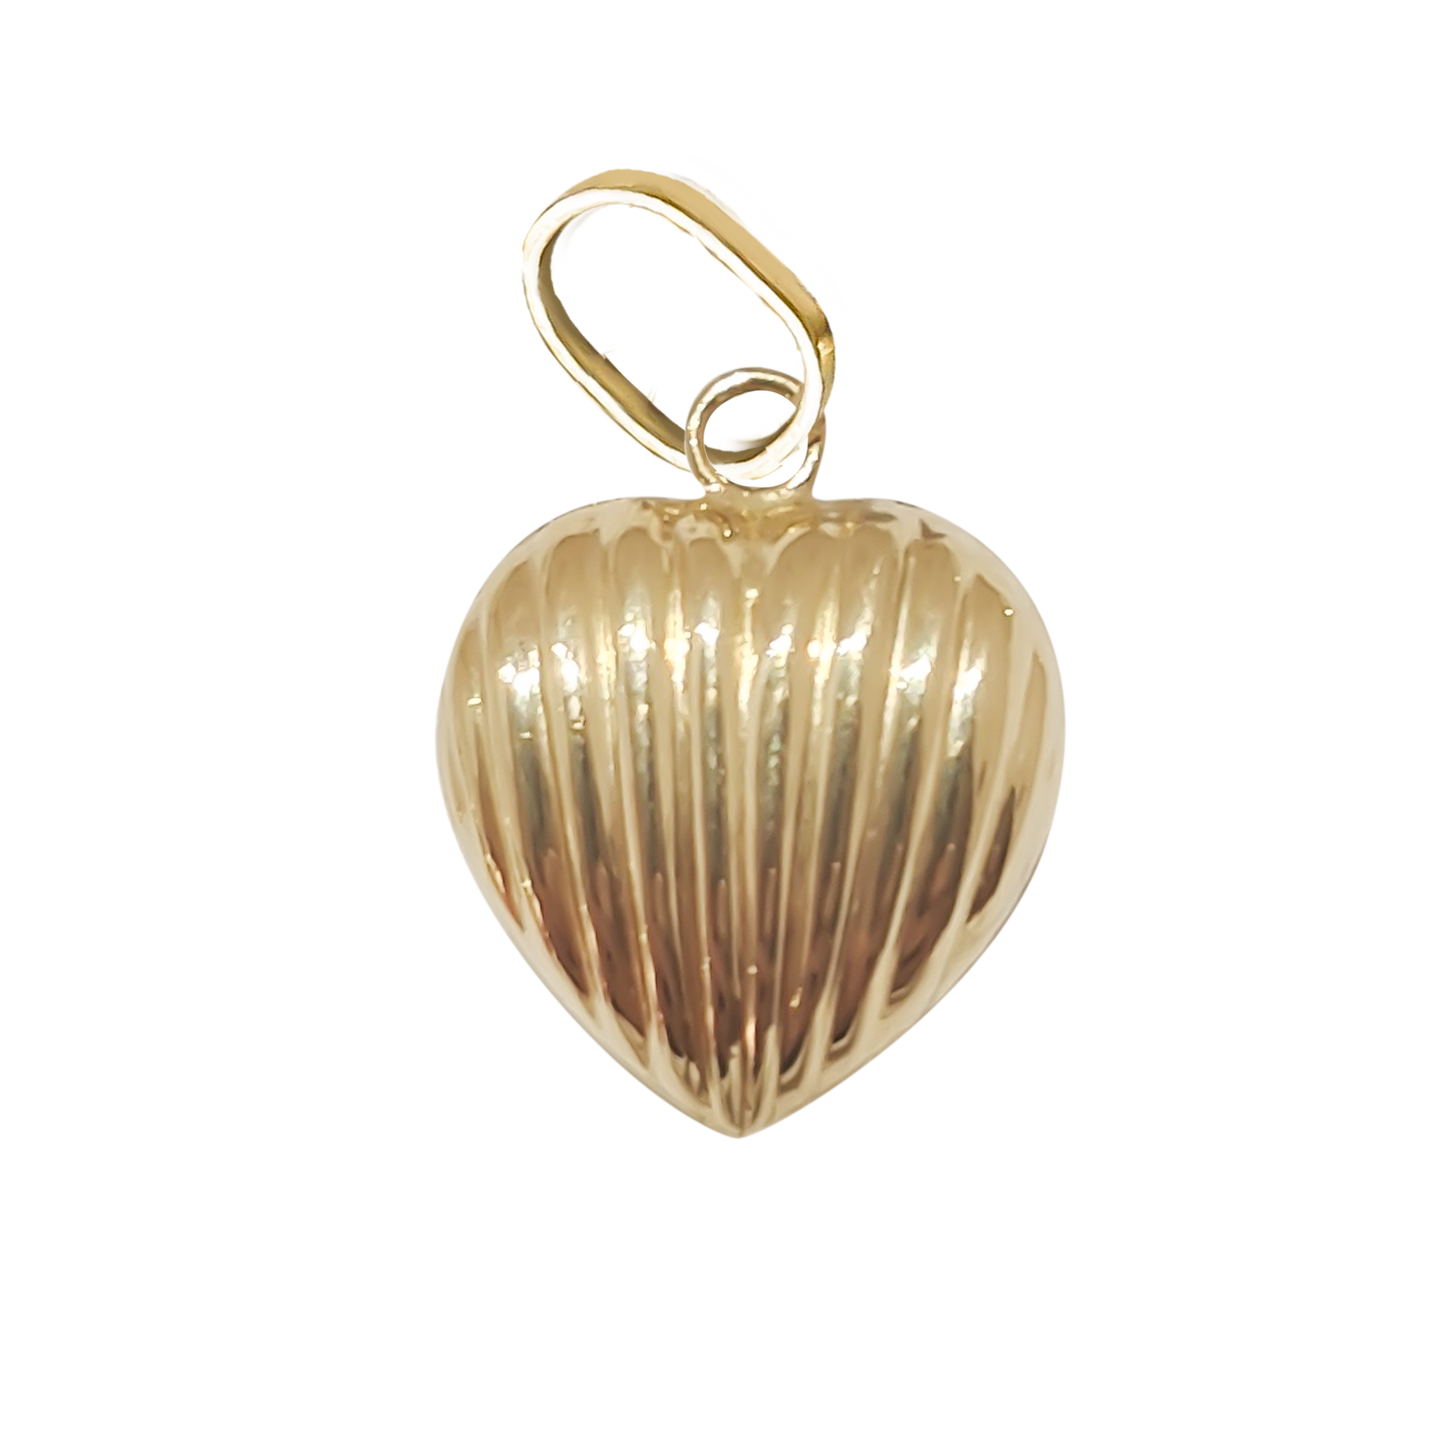 15mm Striped Heart Charm 9ct Yellow Gold